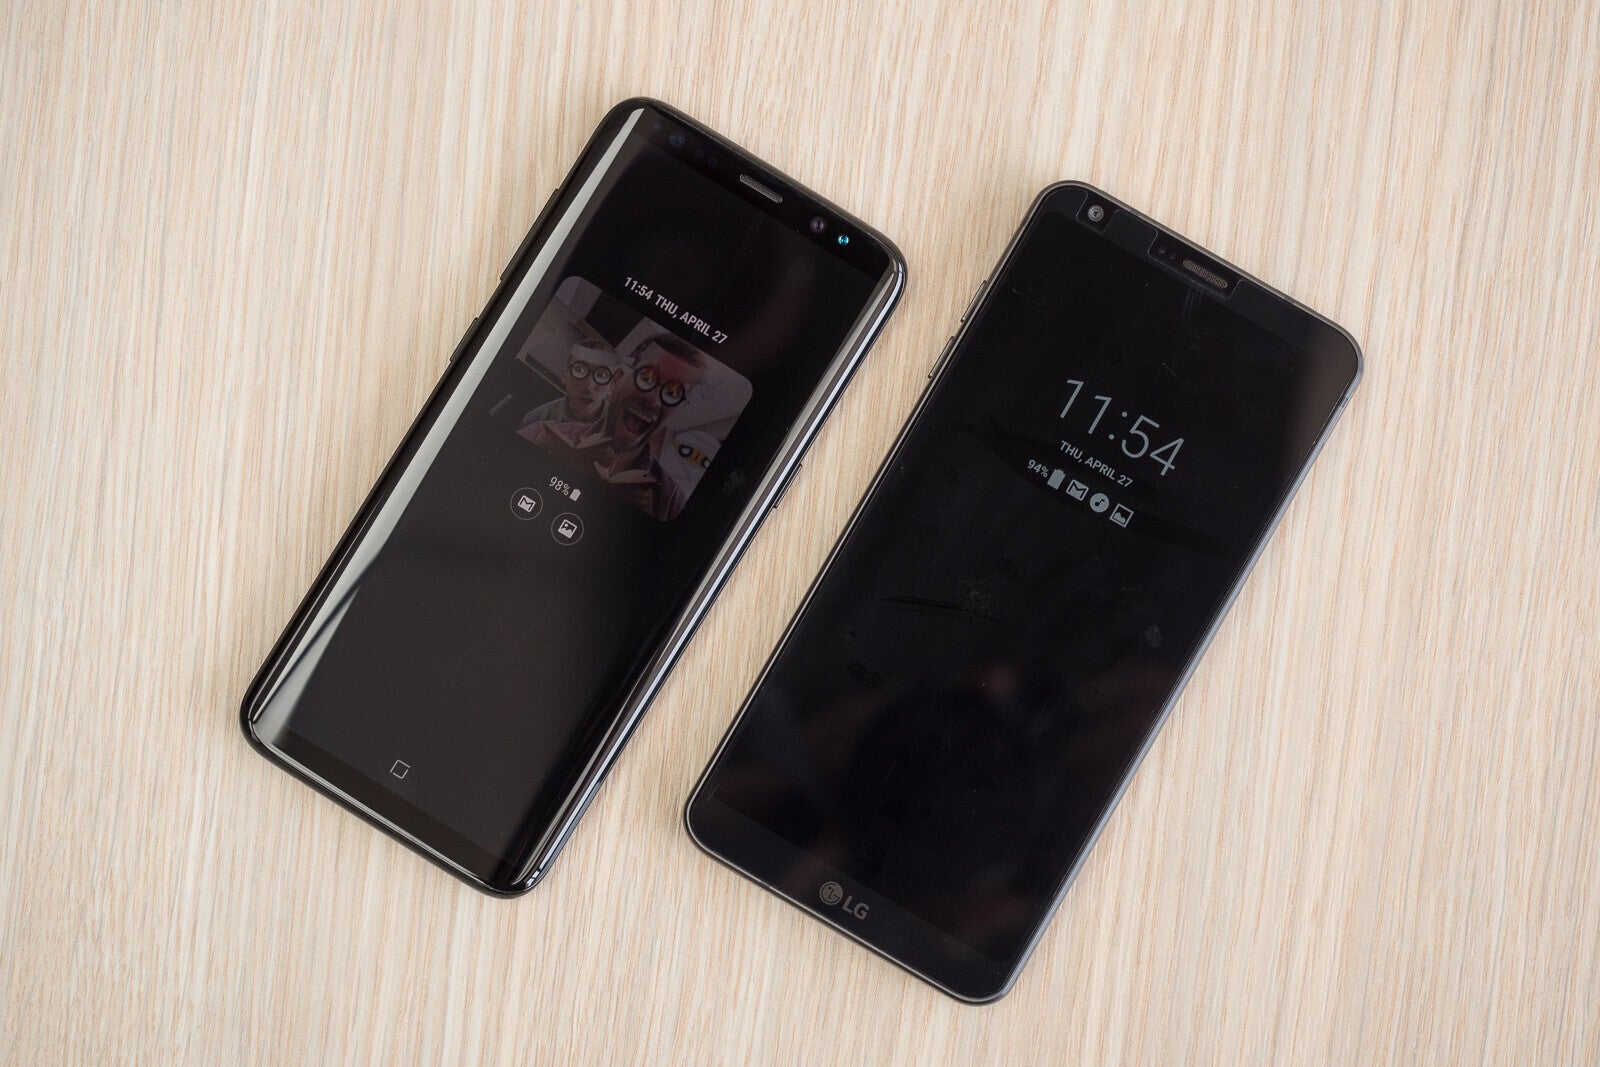 2017 Samsung Galaxy S8 and LG G6 with always-on display. 2021 iPhones – still nothing - Apple, why is the OLED iPhone 13 still missing always-on display?